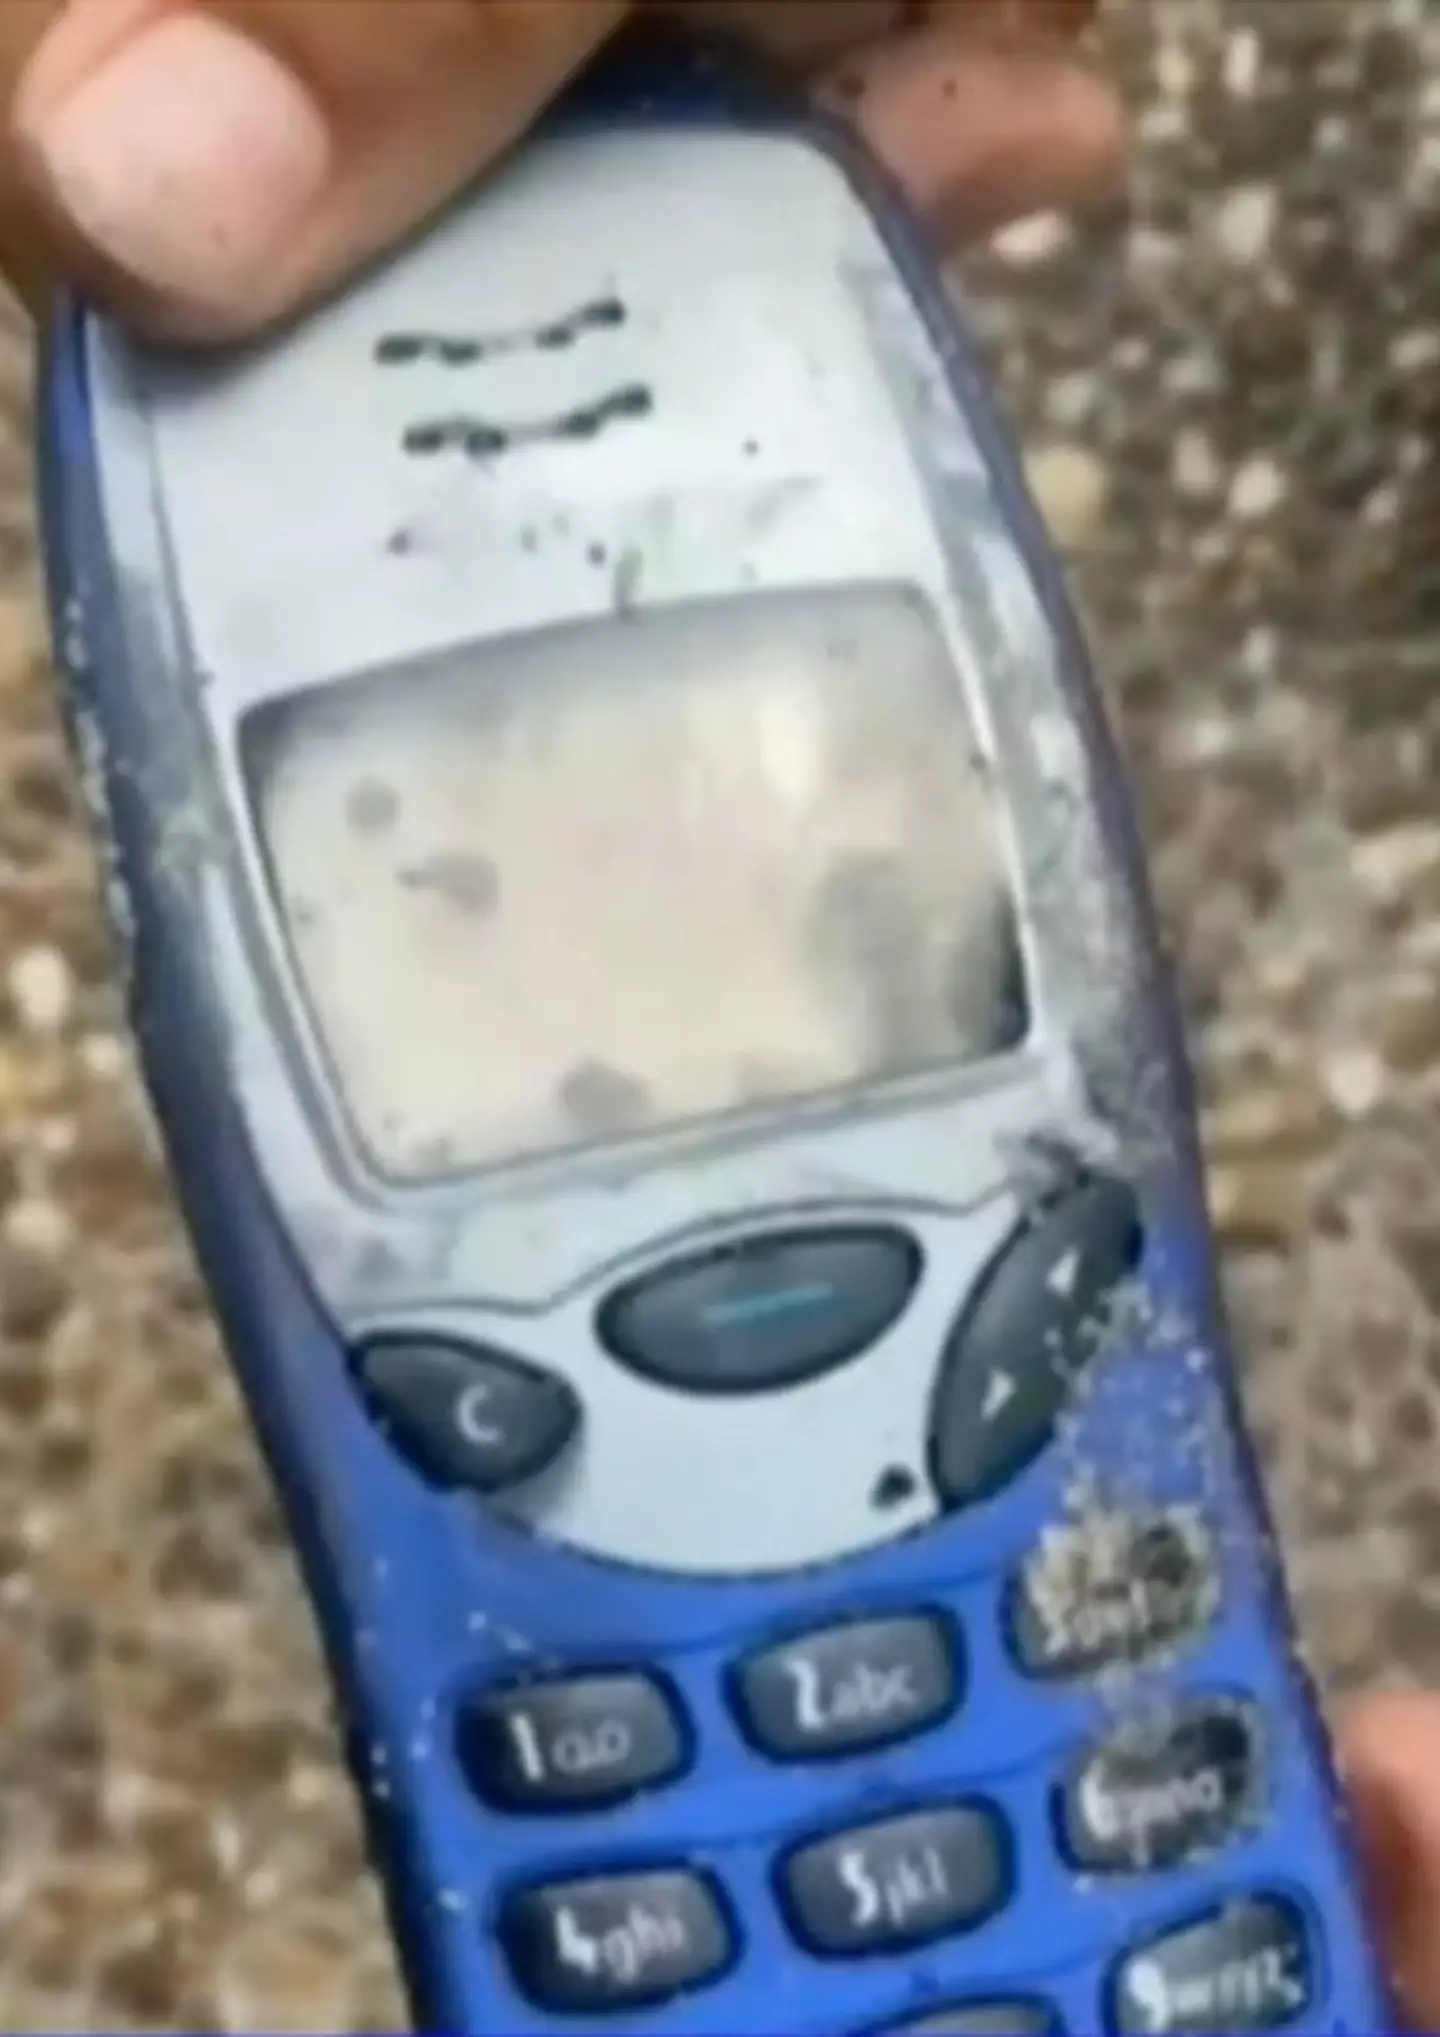 This Nokia 3210 managed to stay in one piece.